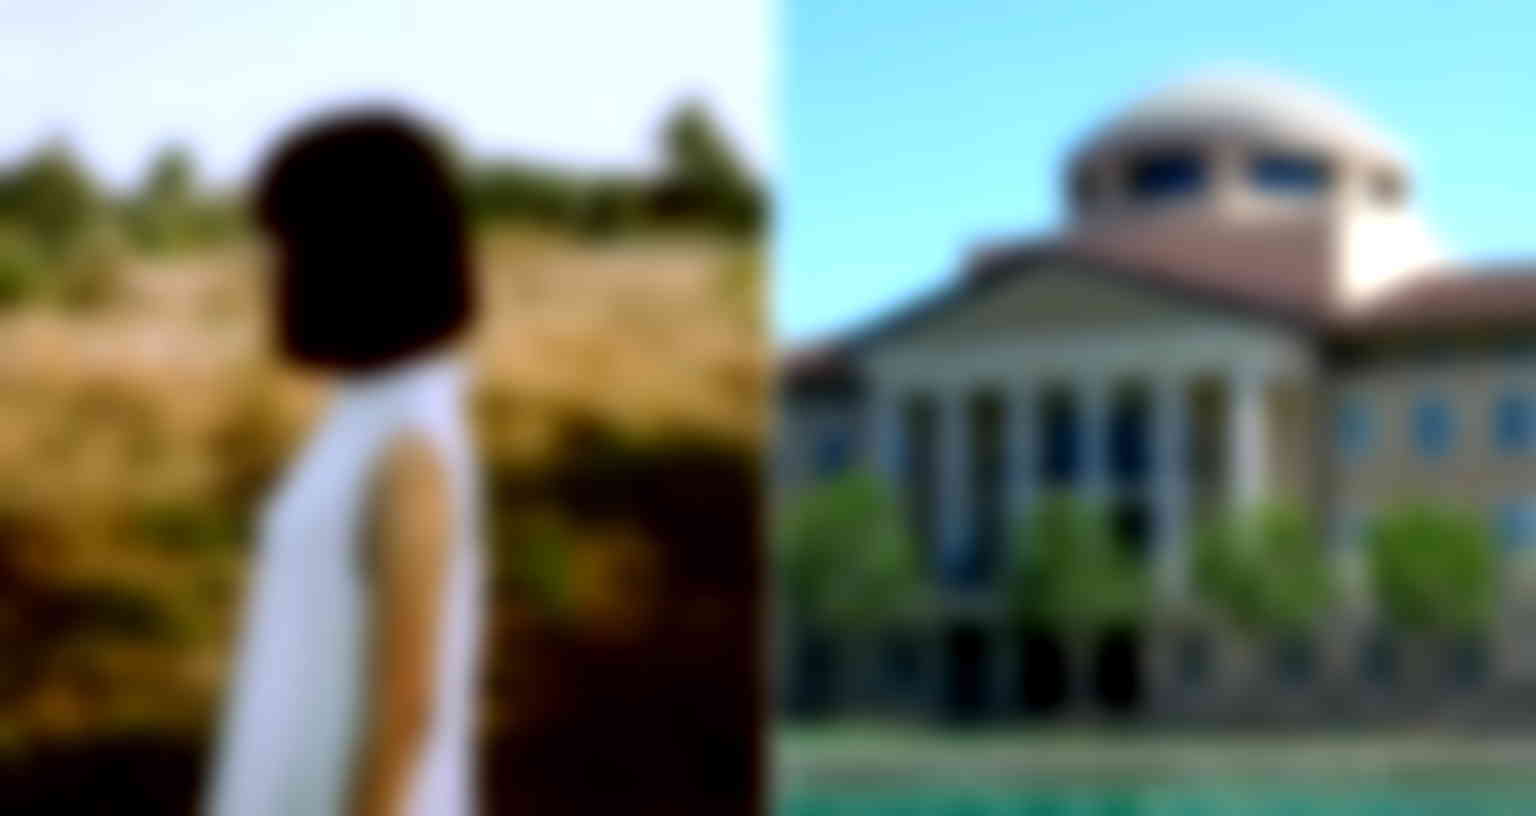 Students Unite After Soka University Told Asian American Survivor to ‘Get Over’ Sexual Harassment